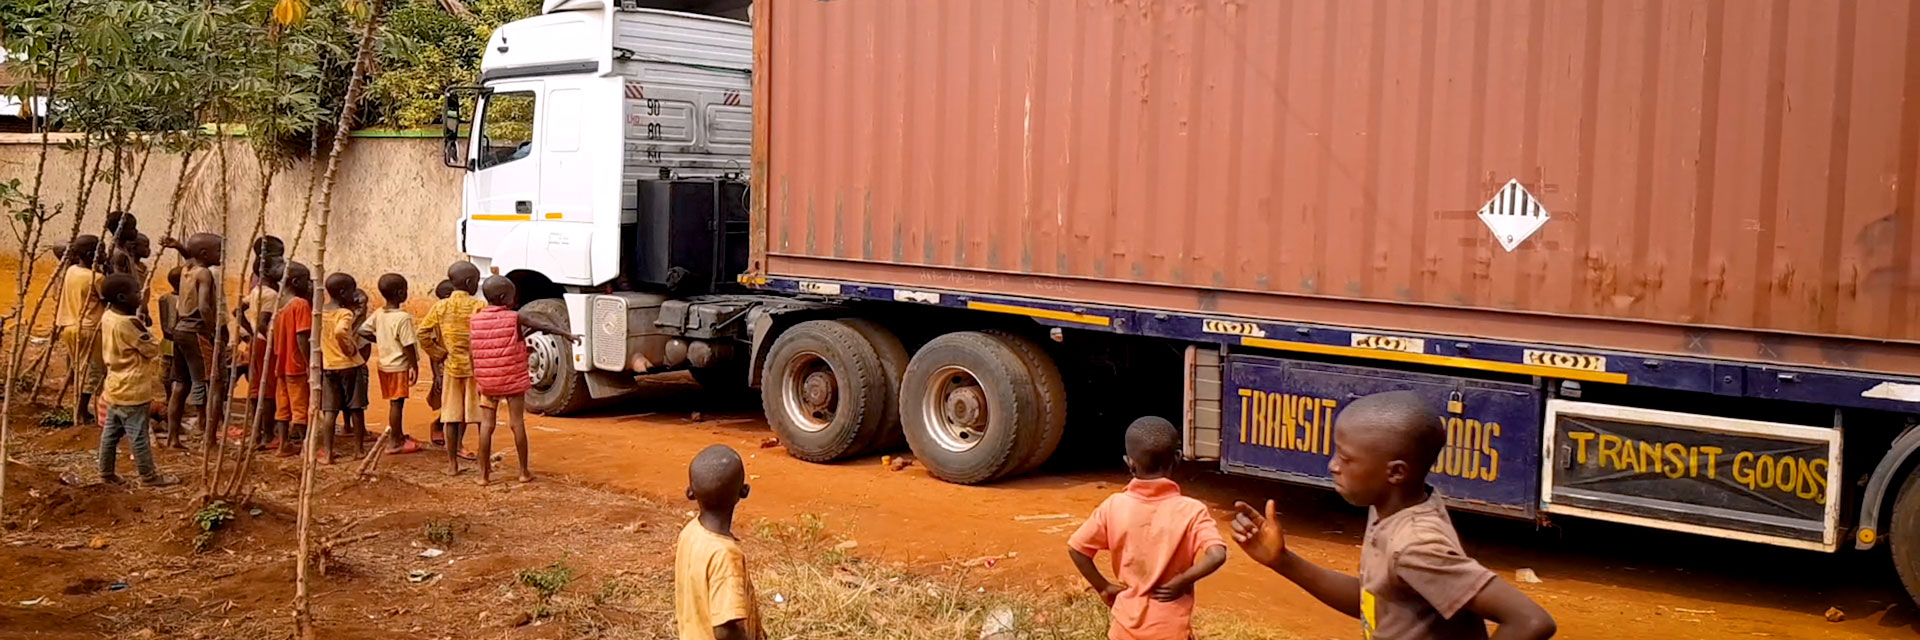 Photo of shipping container arriving at Ubuntu Clinique, with neighbourhood children watching nearby.